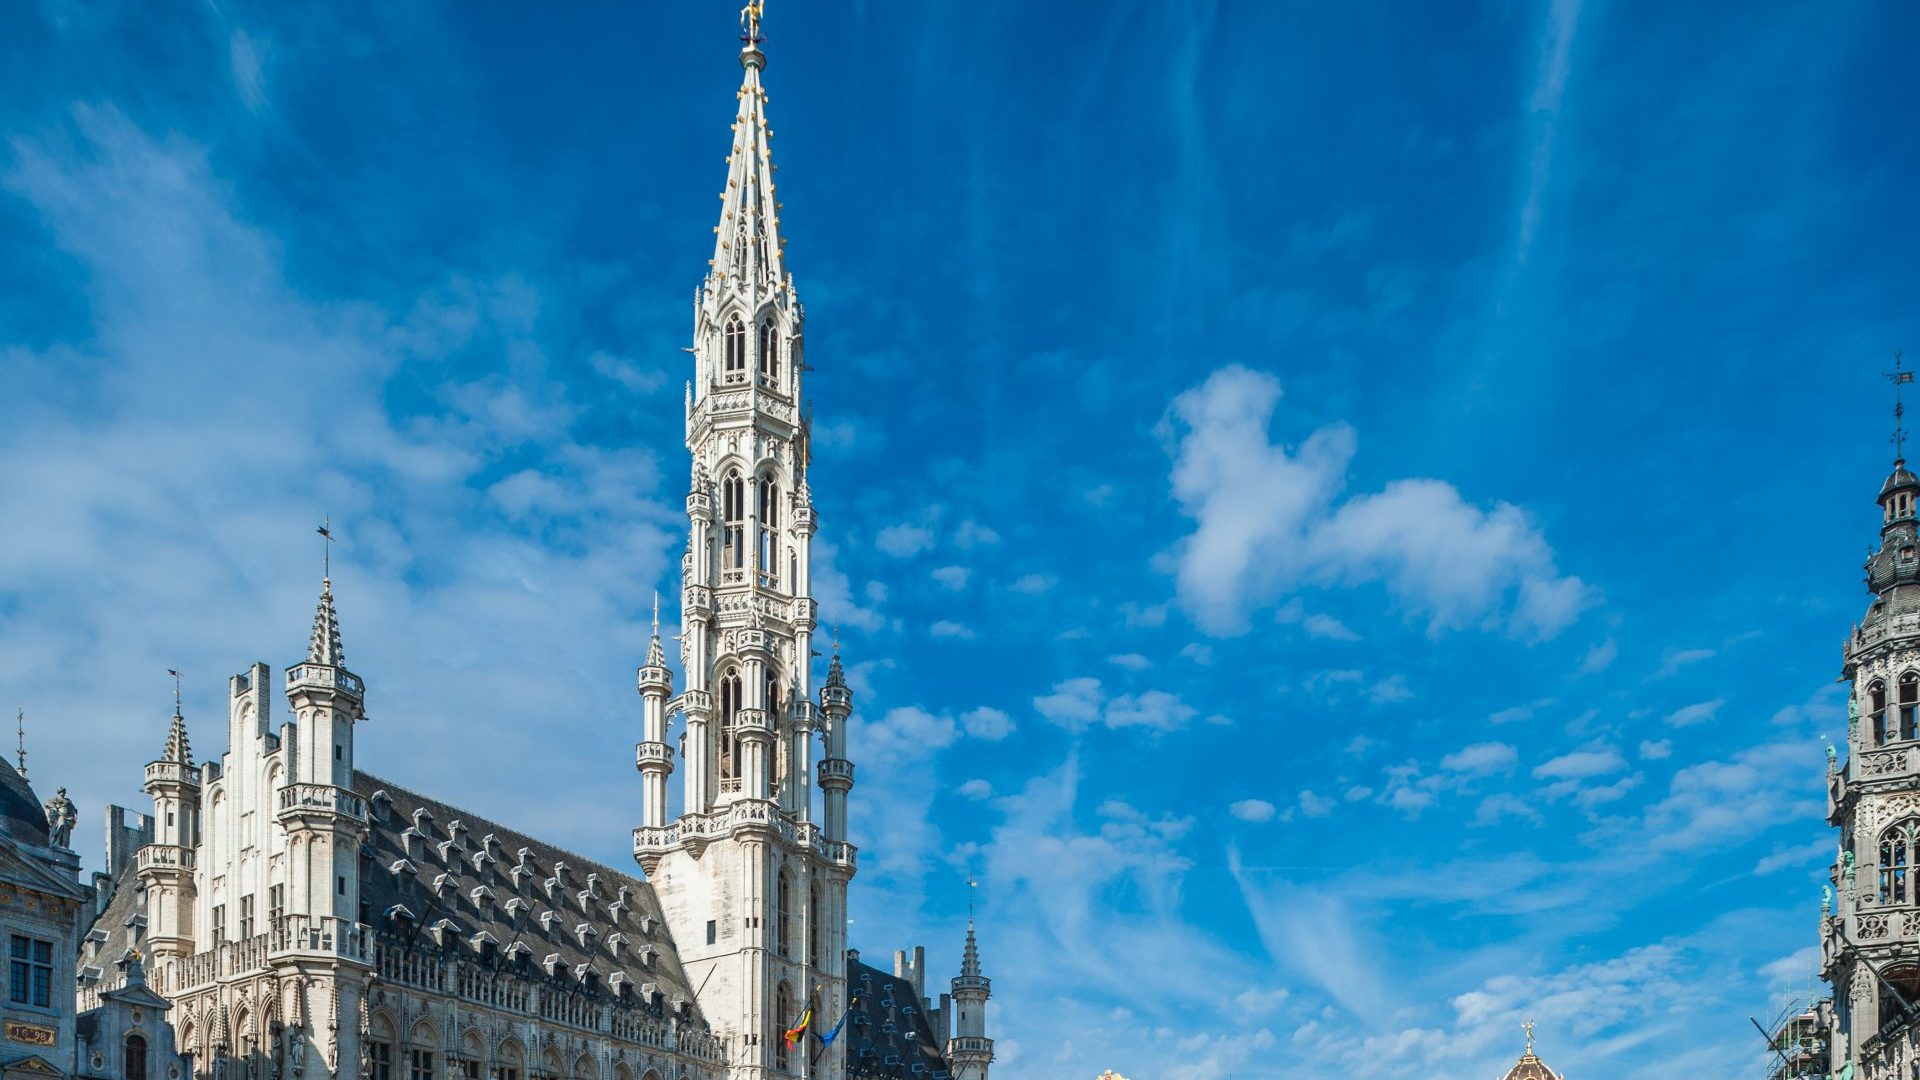 The 15th-century town hall in the Grand Place, Brussels. Photo: Michael Jacobs/Art in All of Us/Corbis/Getty